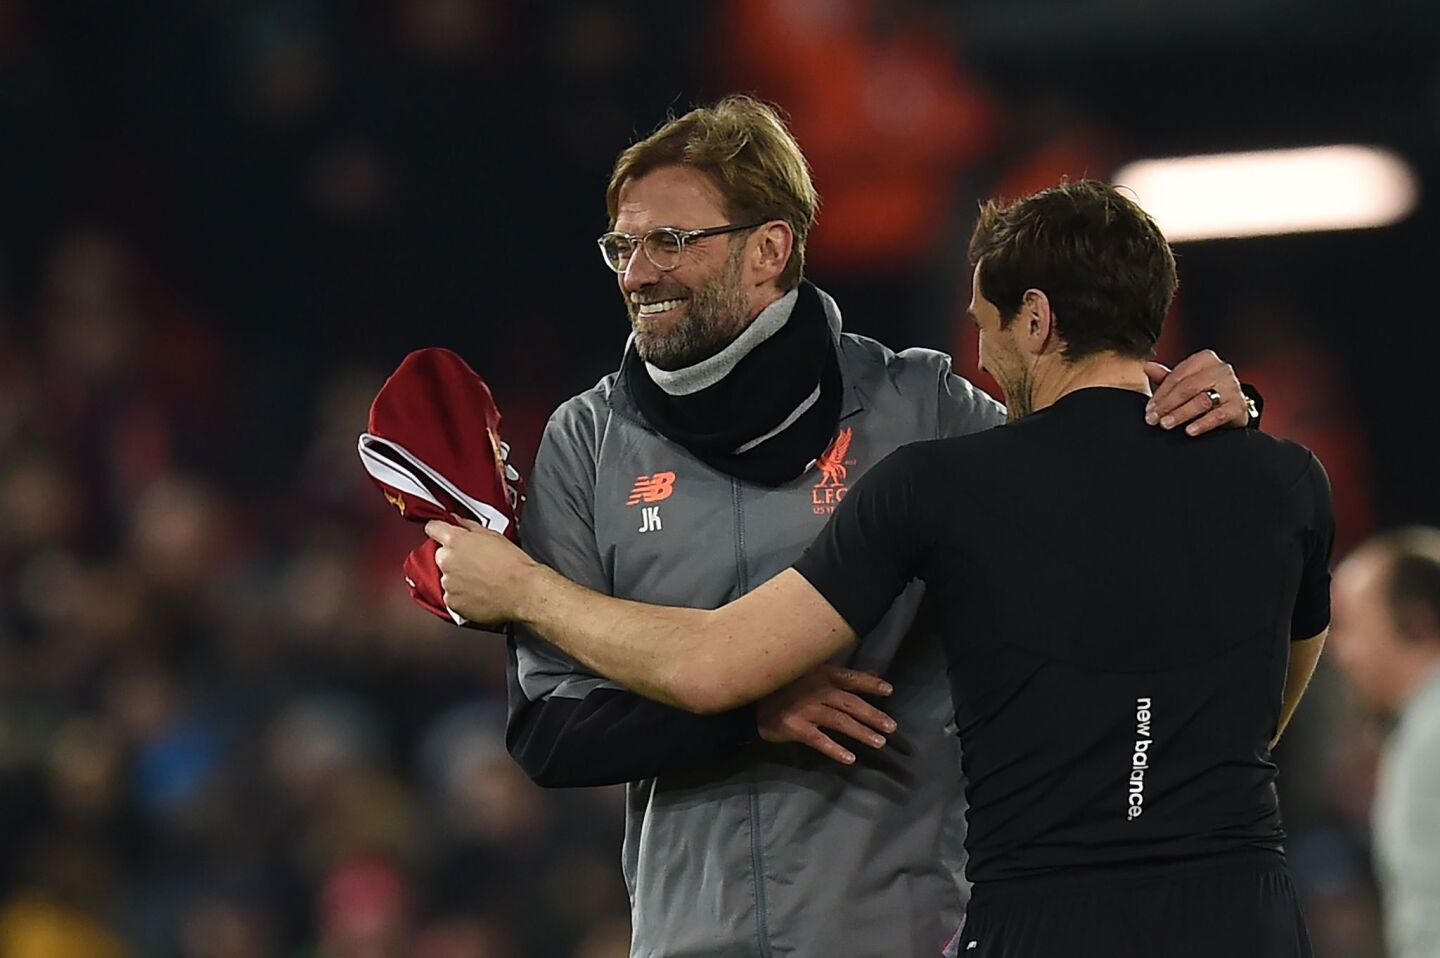 Liverpool's German manager Jurgen Klopp (L) greets Porto's Spanish goalkeeper Iker Casillas after the UEFA Champions League round of sixteen second leg football match between Liverpool and FC Porto at Anfield in Liverpool, north-west England on March 6, 2018. / AFP PHOTO / PAUL ELLISPAUL ELLIS/AFP/Getty Images ** OUTS - ELSENT, FPG, CM - OUTS * NM, PH, VA if sourced by CT, LA or MoD **